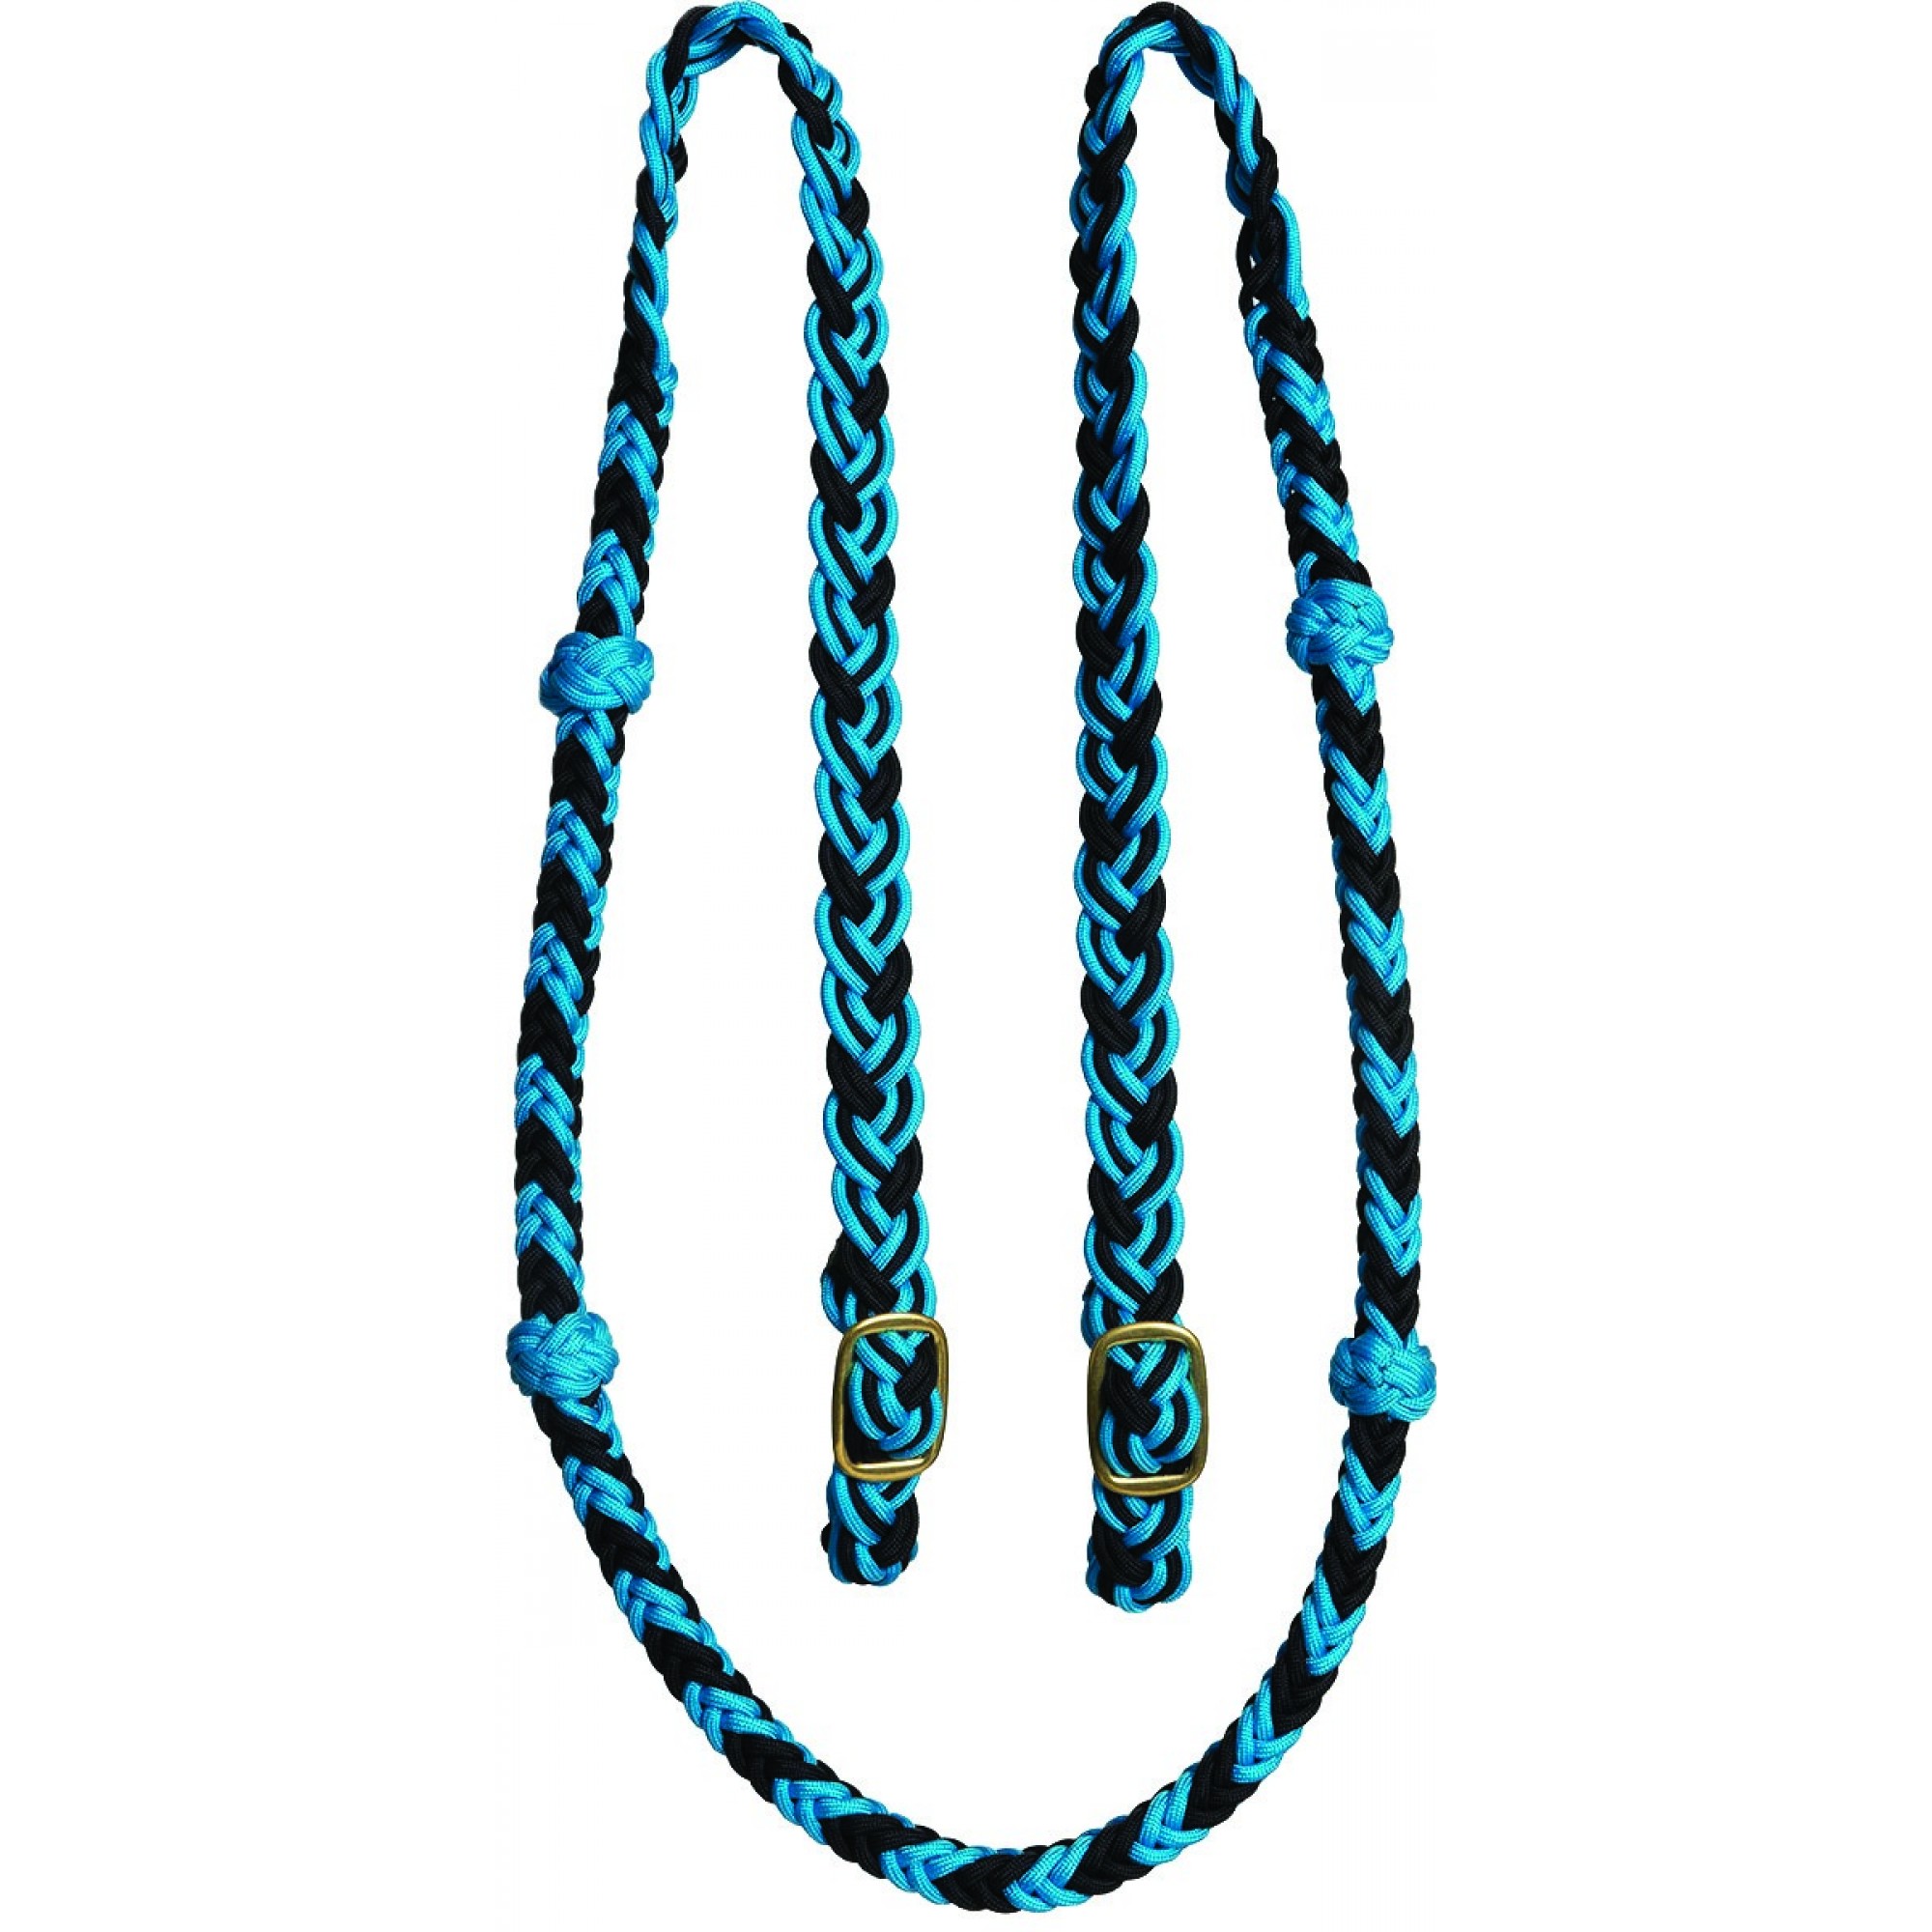 Roping Knotted Horse Western Barrel Reins Rein Nylon Braided Red